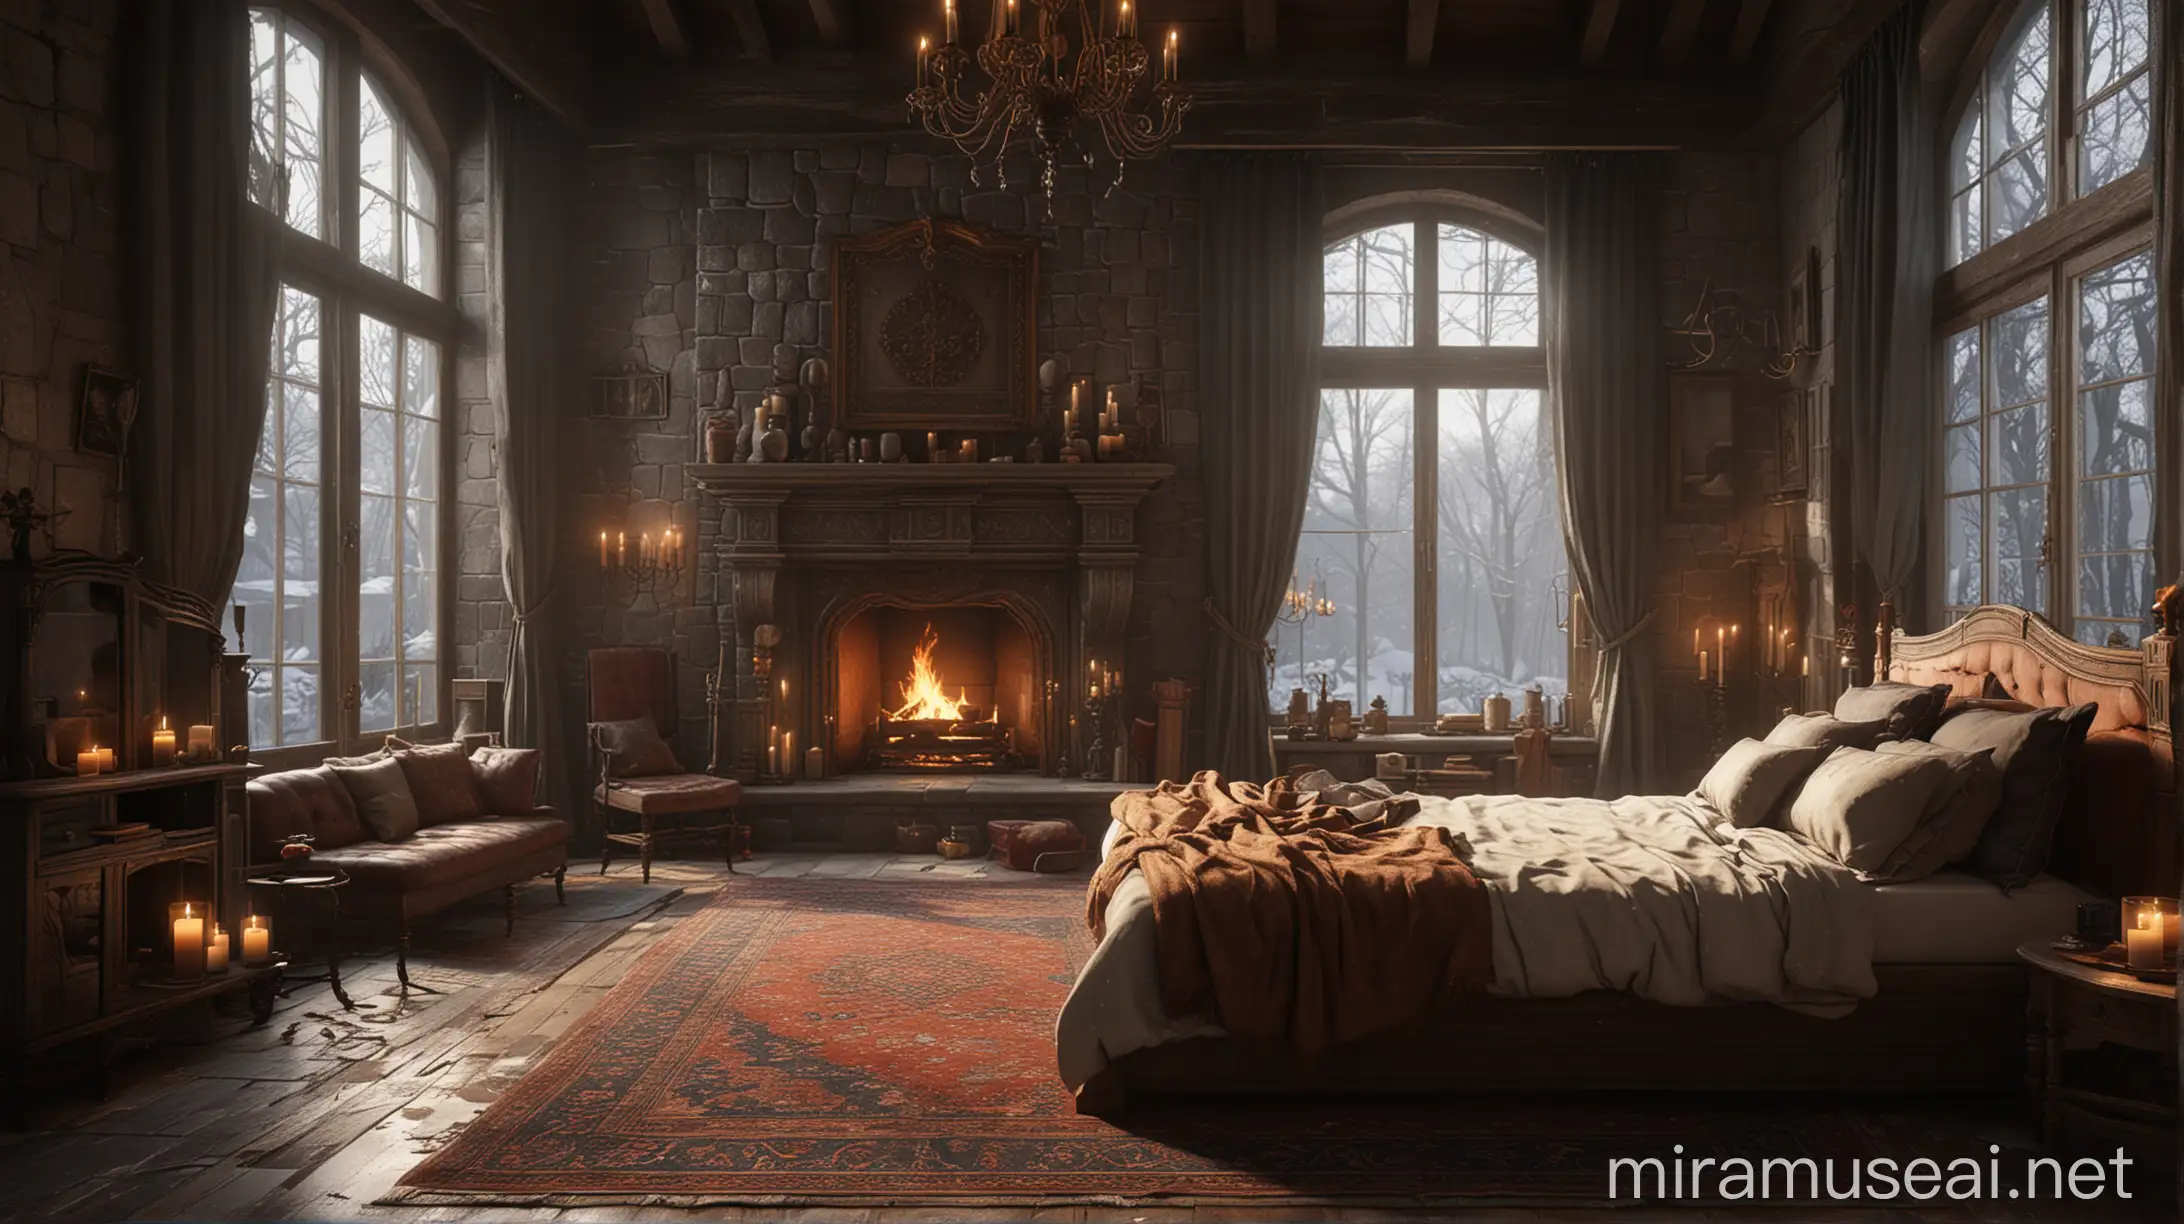 Cozy Castle Bedroom with Fireplace and Snowy Moonlit Forest View